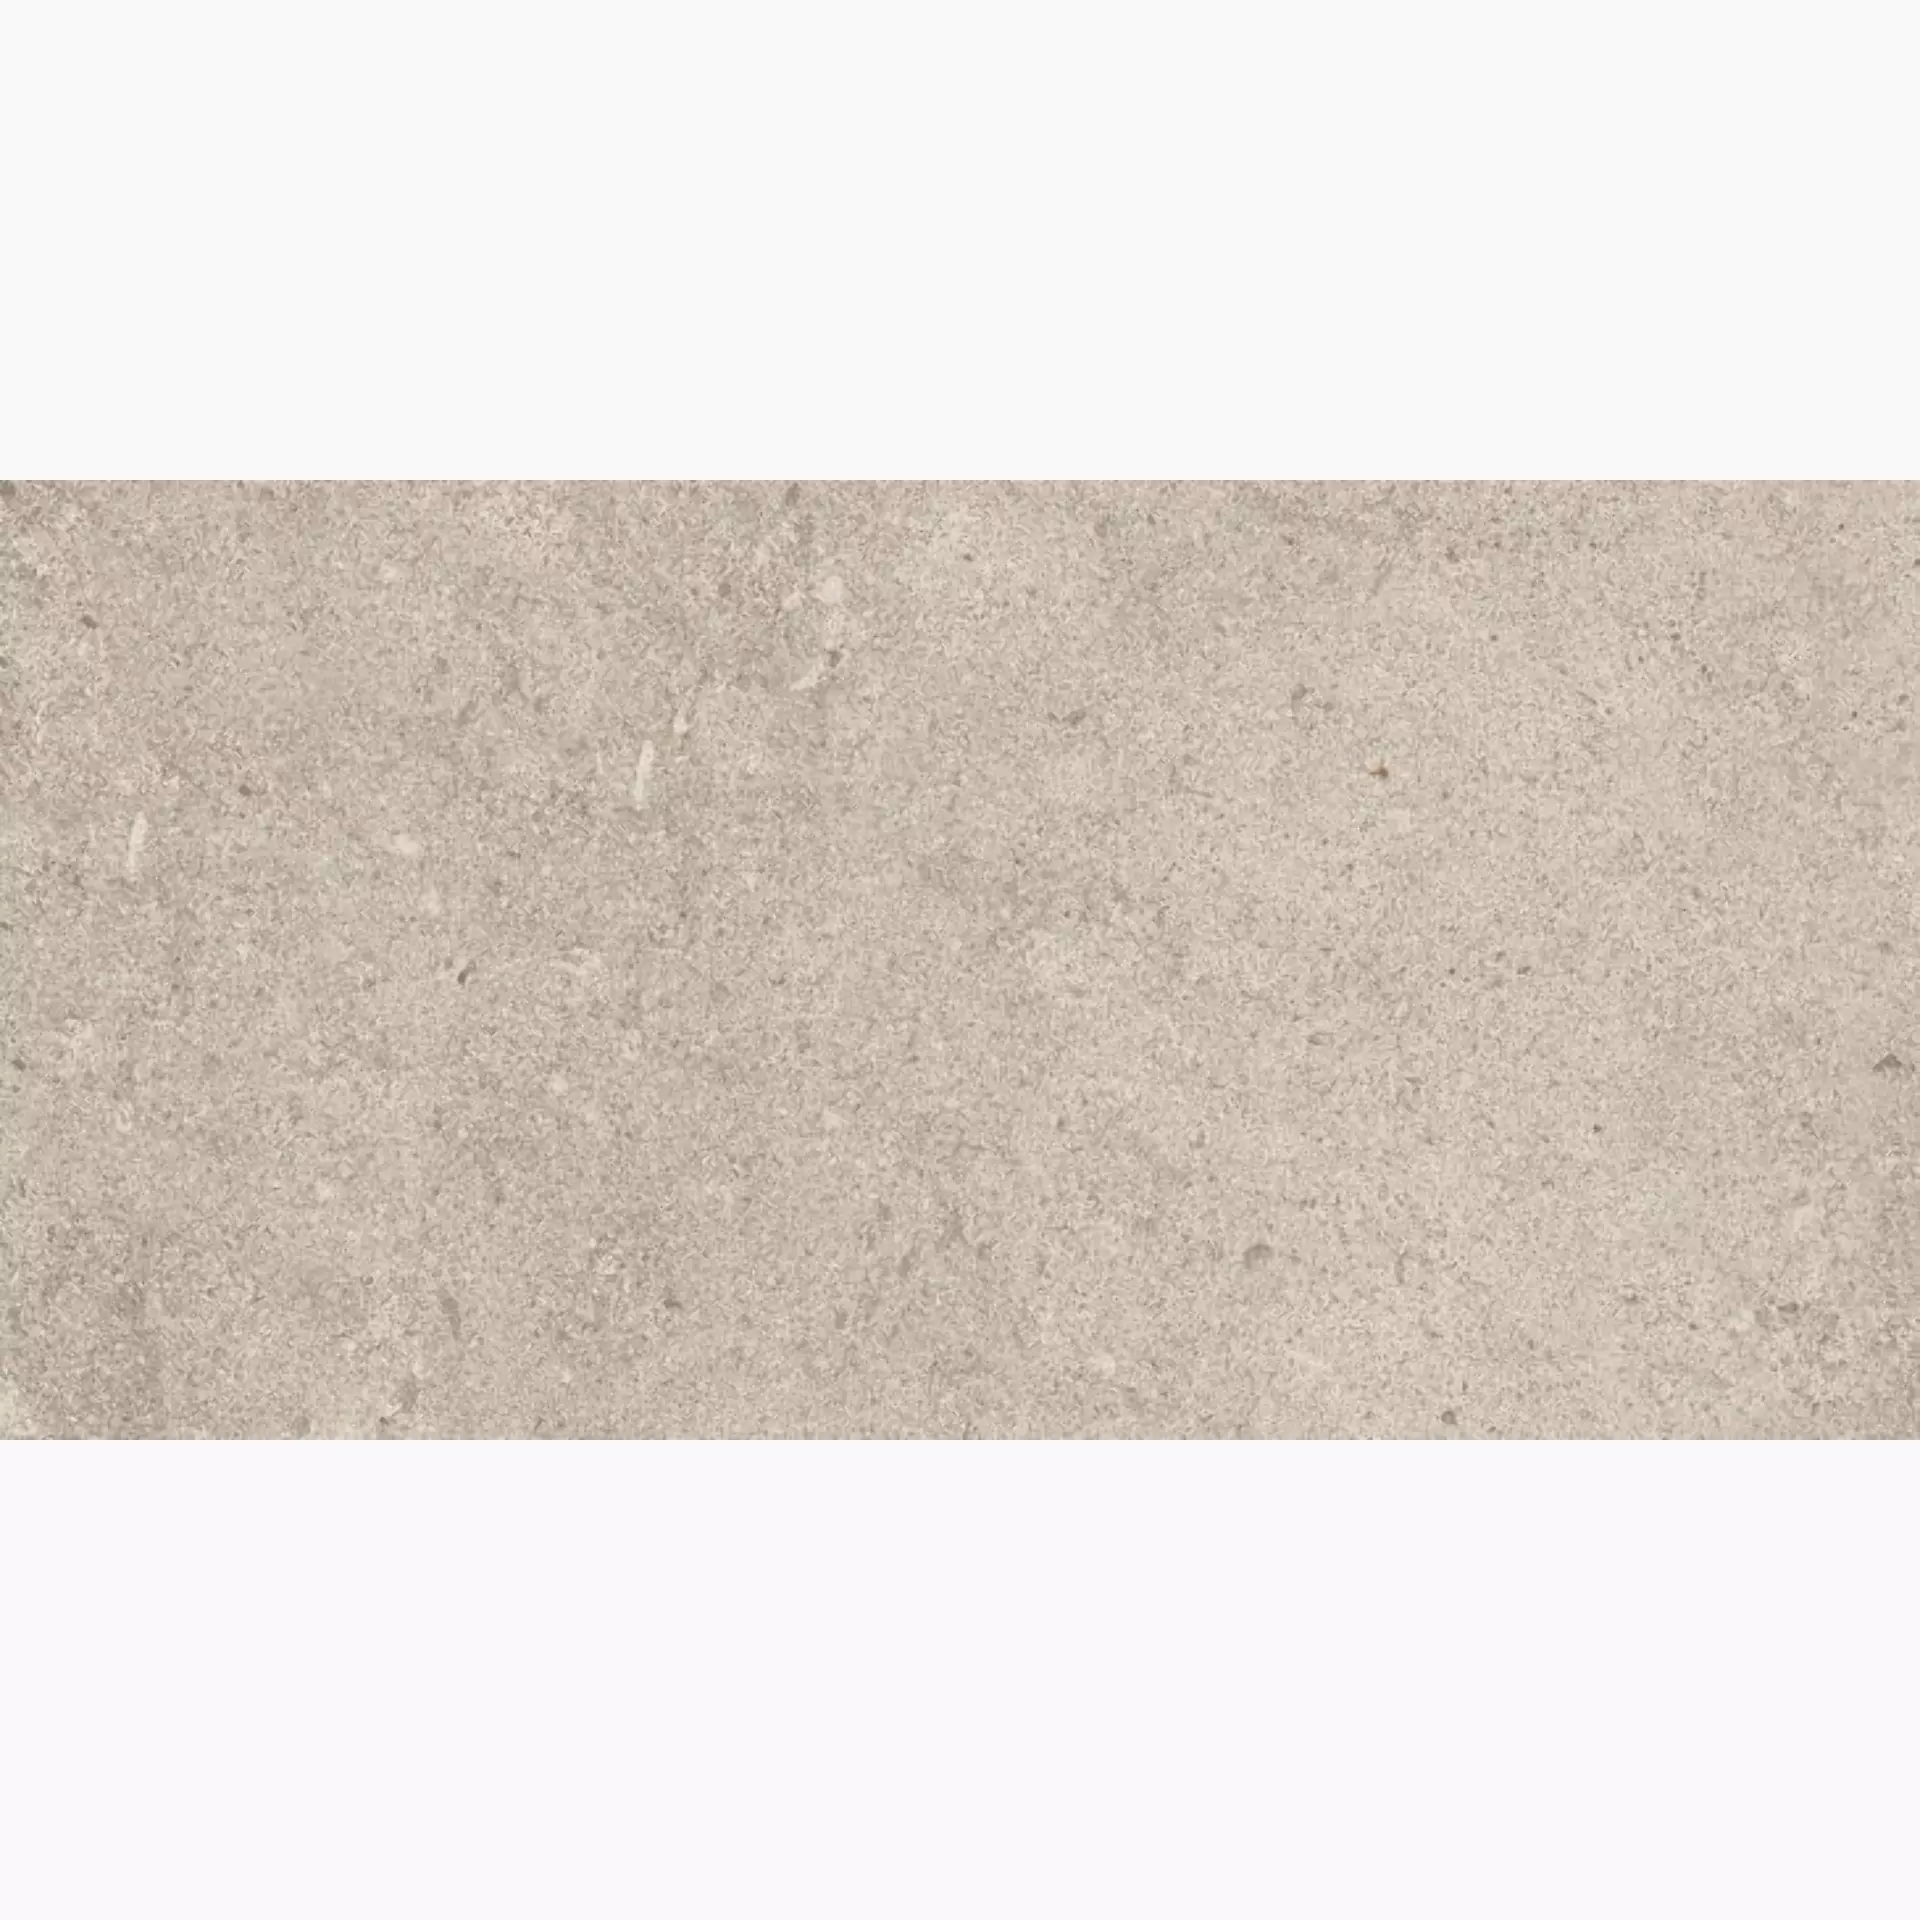 Sant Agostino Highstone Greige Natural CSAHSGR130 30x60cm rectified 10mm